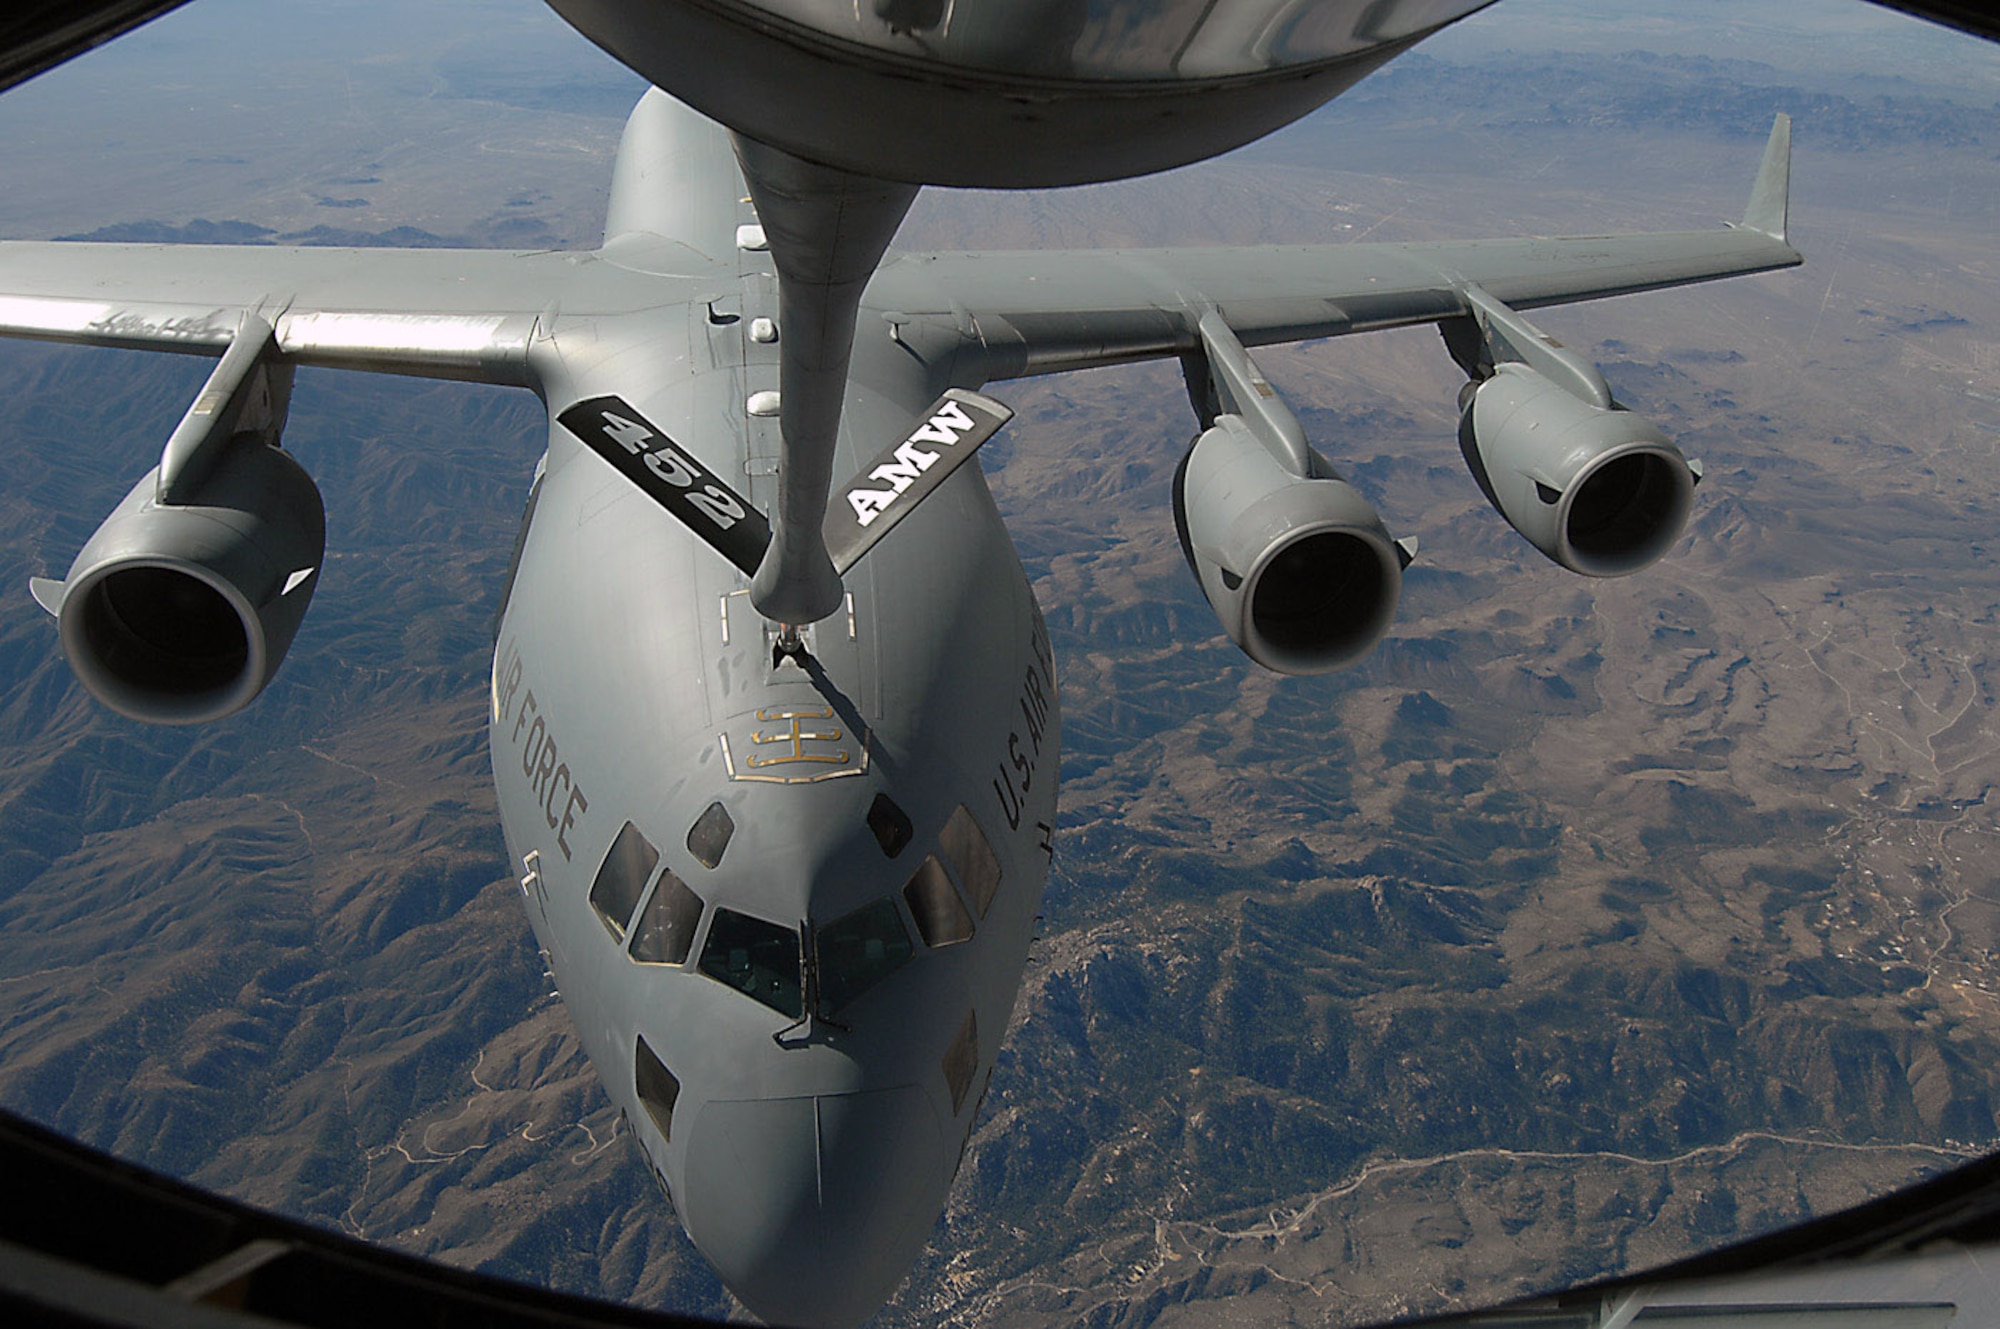 C-17 Globemaster III receives fuel from a KC-135 Stratotanker during an aerial refueling mission Nov. 12 over the Southwest. Both aircraft are from the 452nd Air Mobility Wing at March Air Reserve Base, Calif. (U.S. Air Force photo/Master Sgt. Rick Sforza) 